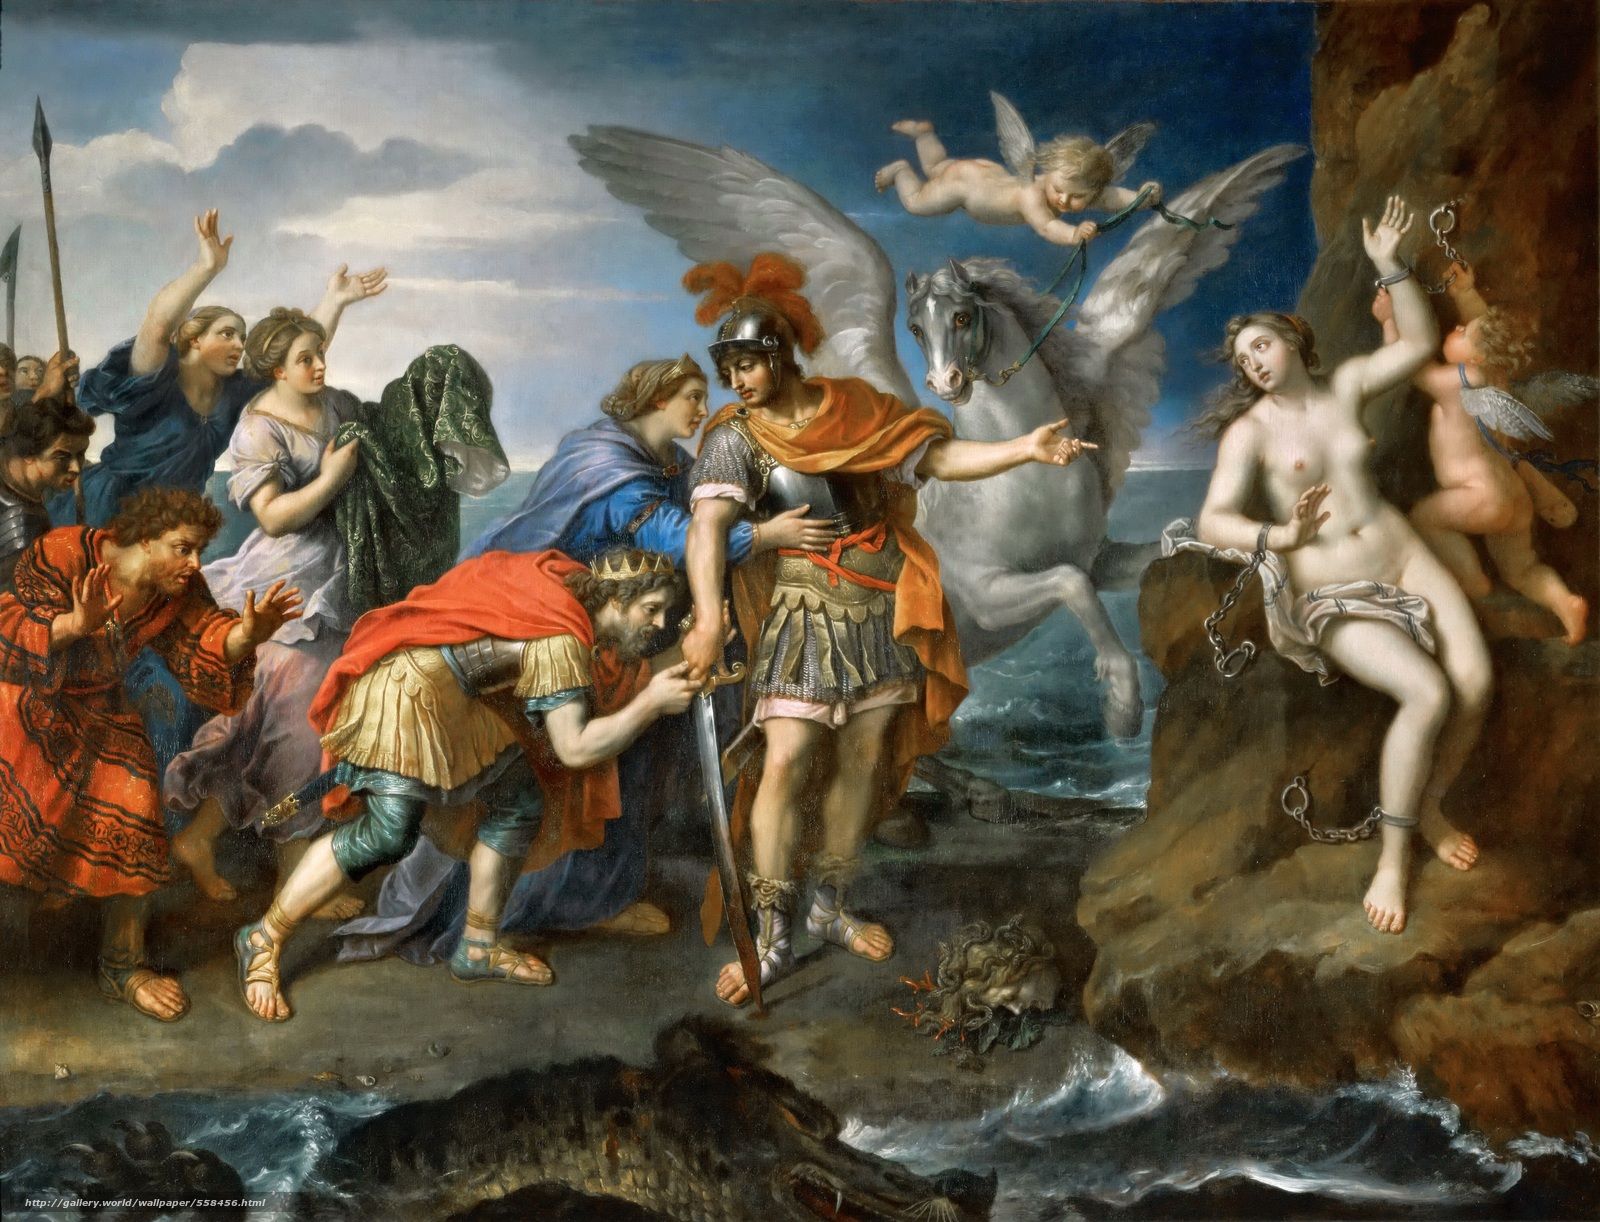 Download wallpaper Mignard, Pierre, Perseus and Andromeda, picture free desktop wallpaper in the resolution 3920x2995